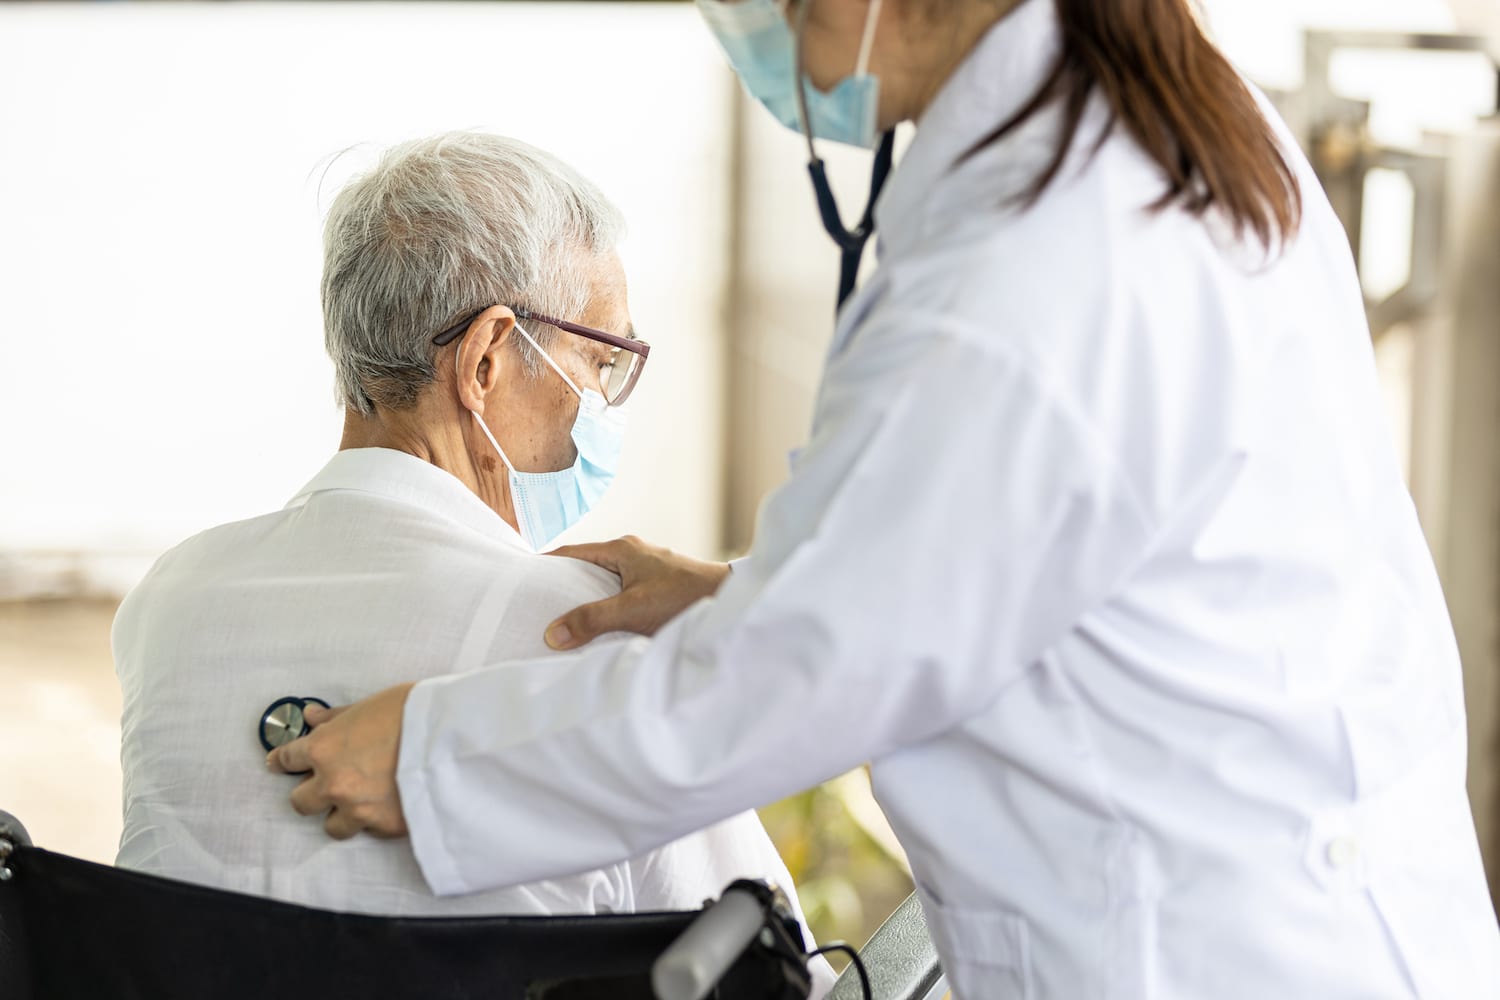 Doctor with a stethoscope on a patient's back, listening for breaths